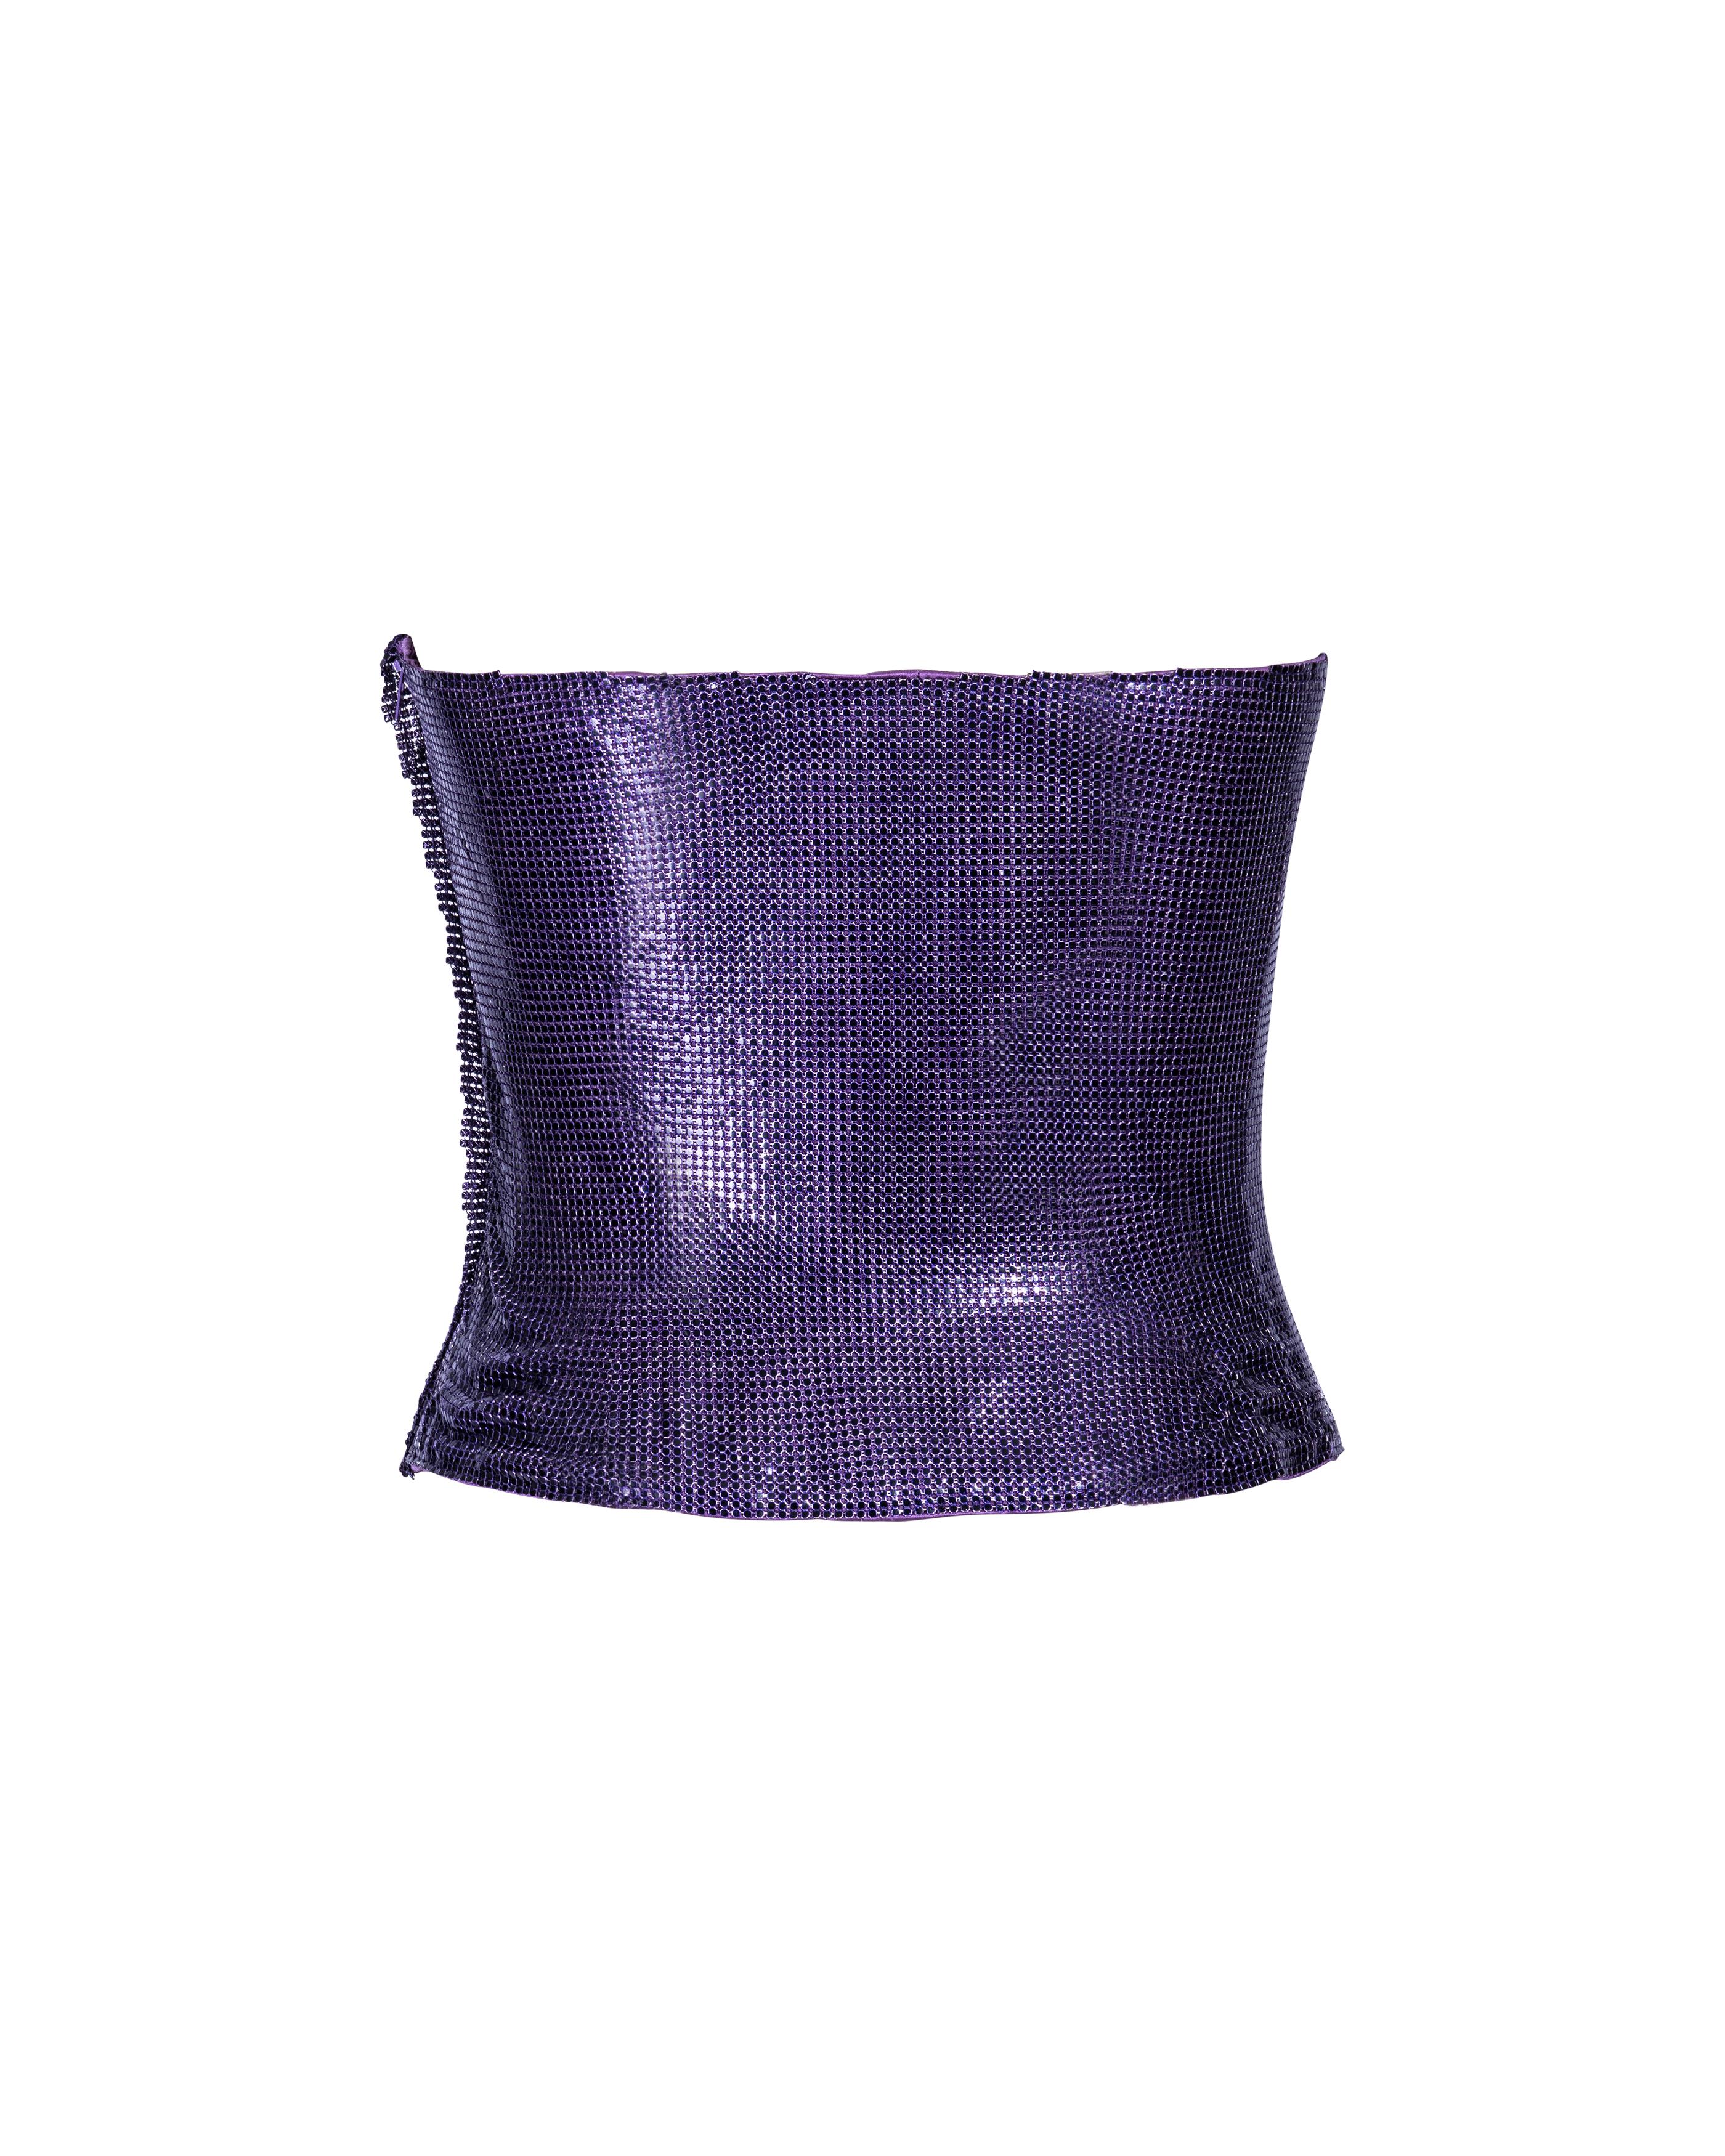 S/S 1998 Atelier Versace Haute Couture Purple Strapless Oroton Chainmail Top For Sale 1